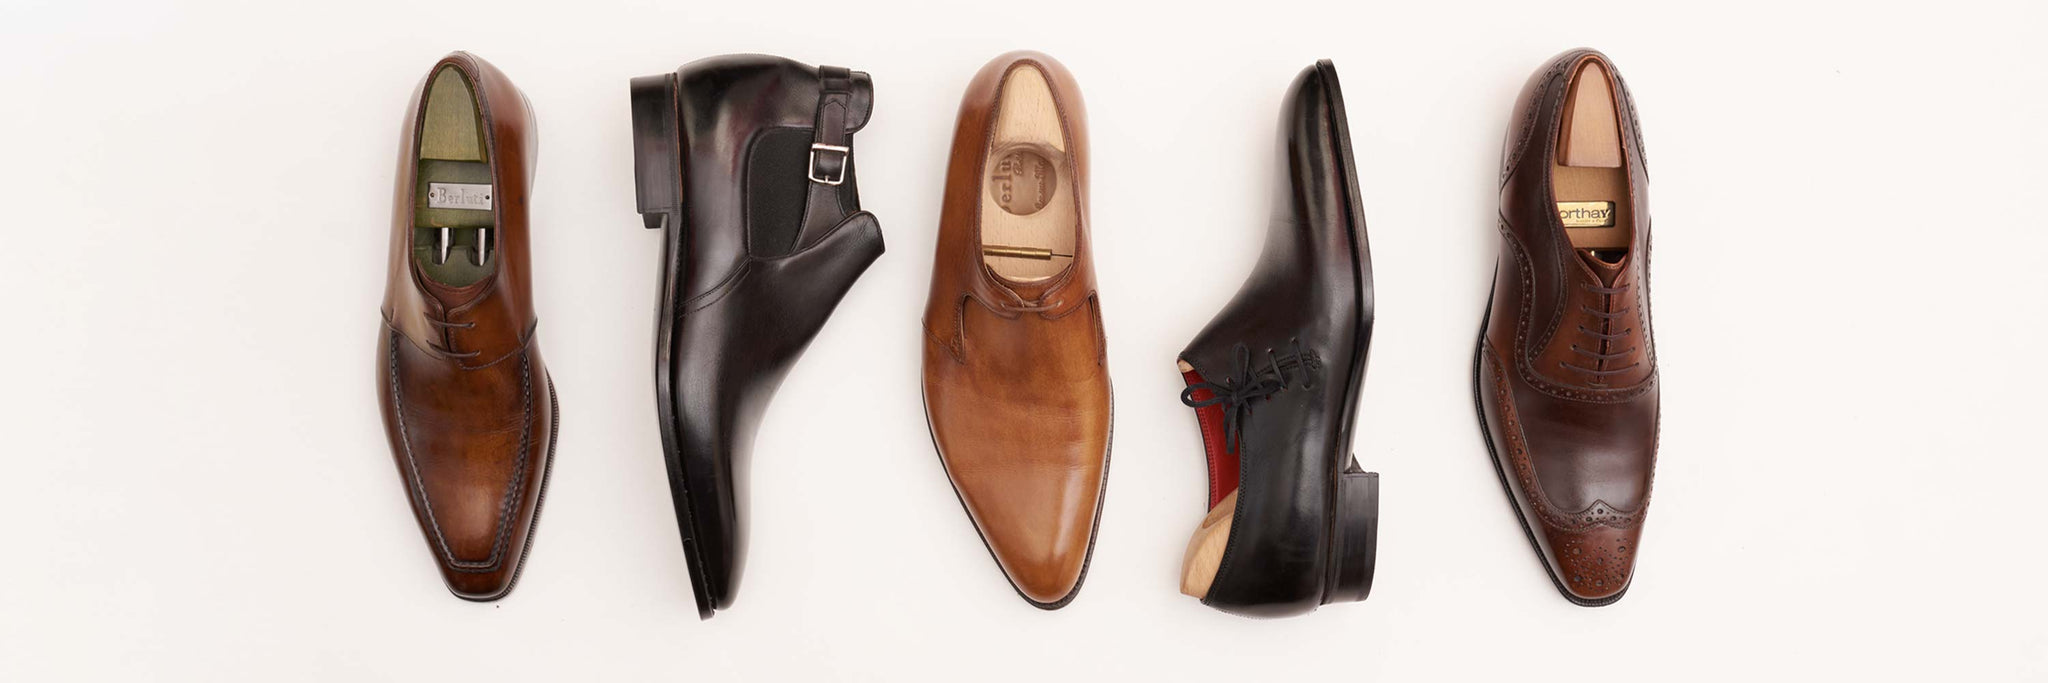 Handmade Shoes at Sartoriale.com - The Luxury Store for Men